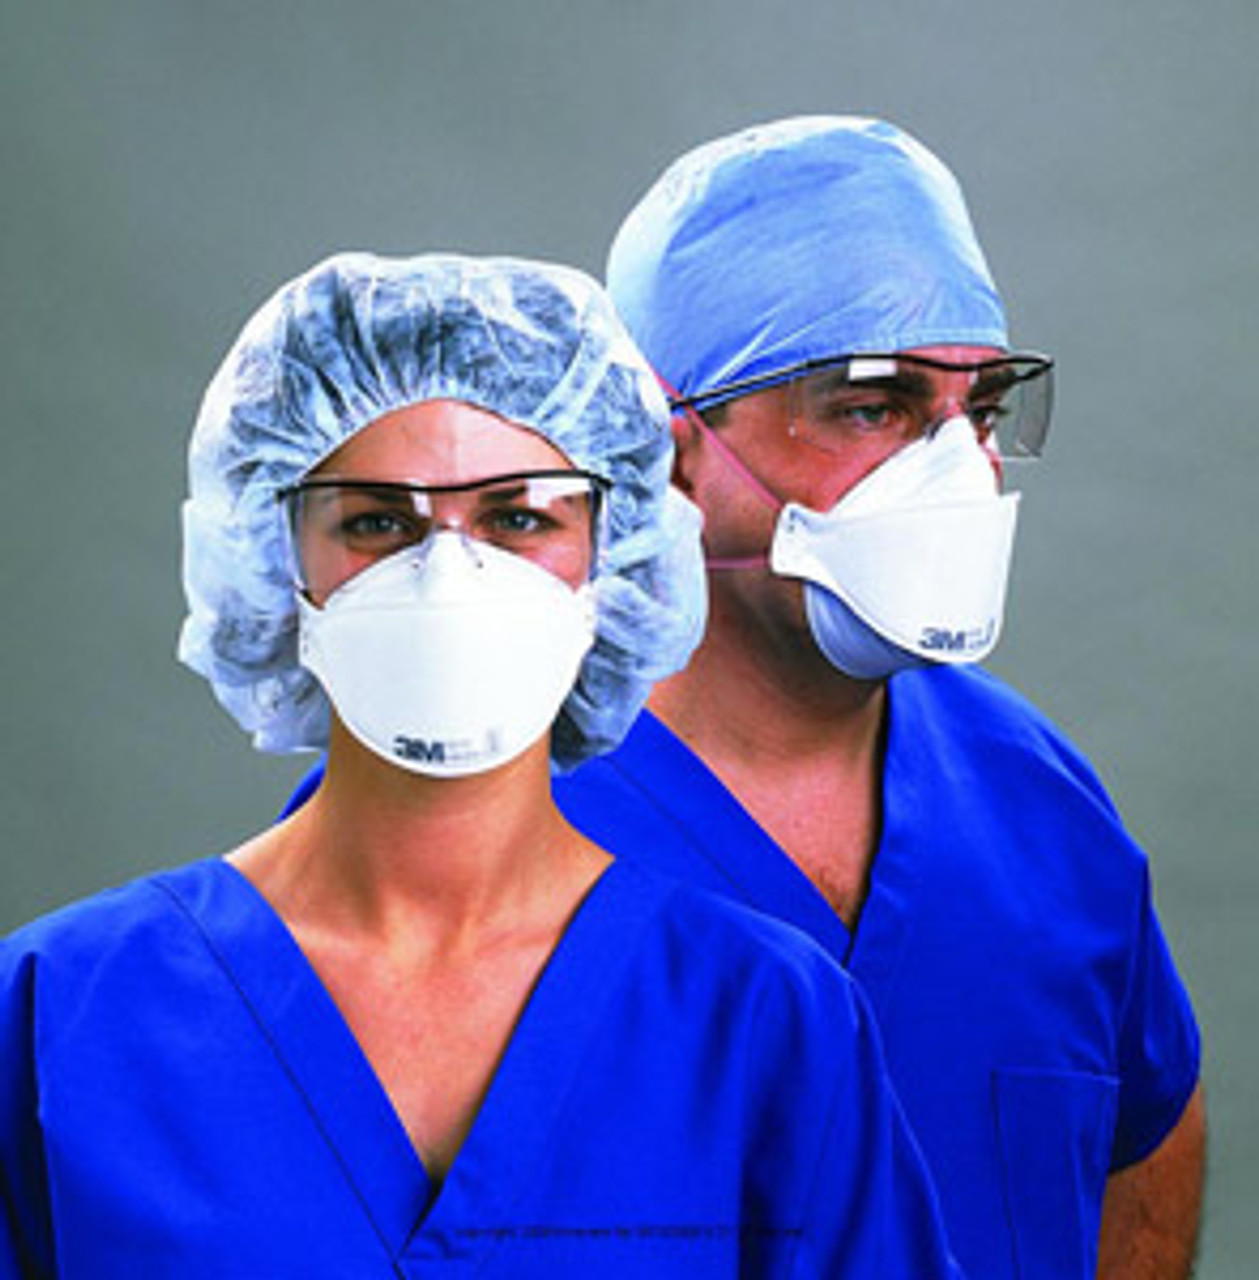 N95 Health Care Particulate Respirator and Surgical Mask MMM1870BX